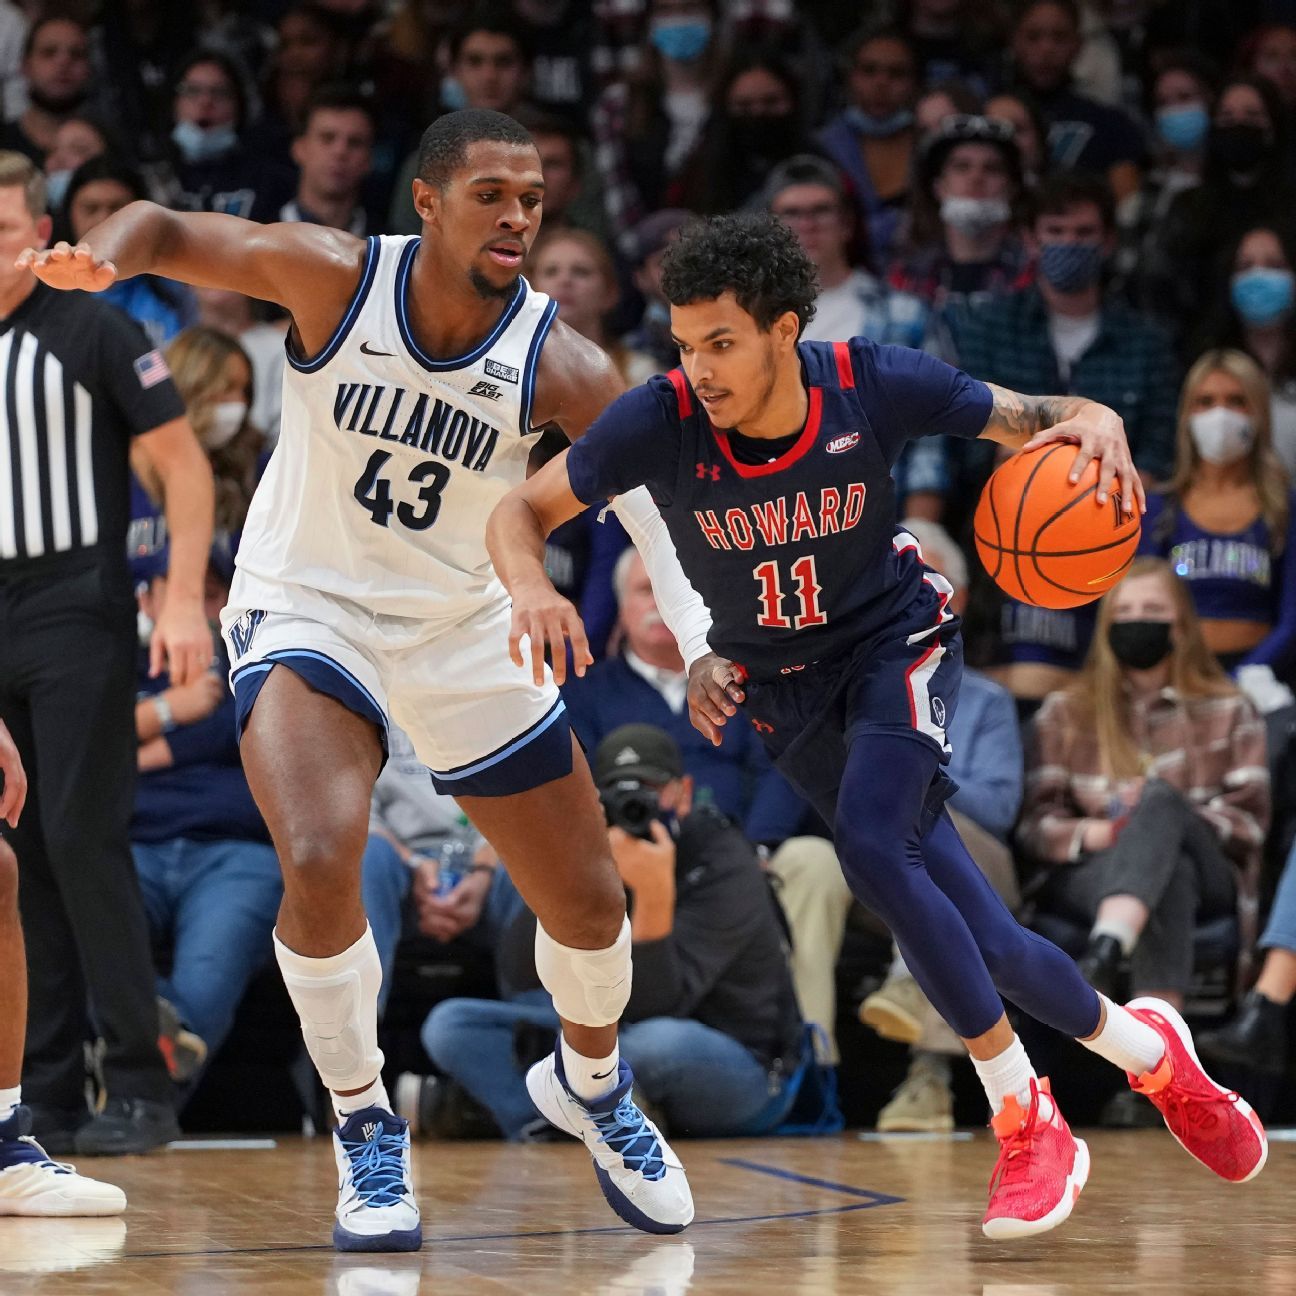 Howard University men's basketball team signs NIL deal with moving company, College H.U.N.K.S. Hauling Junk